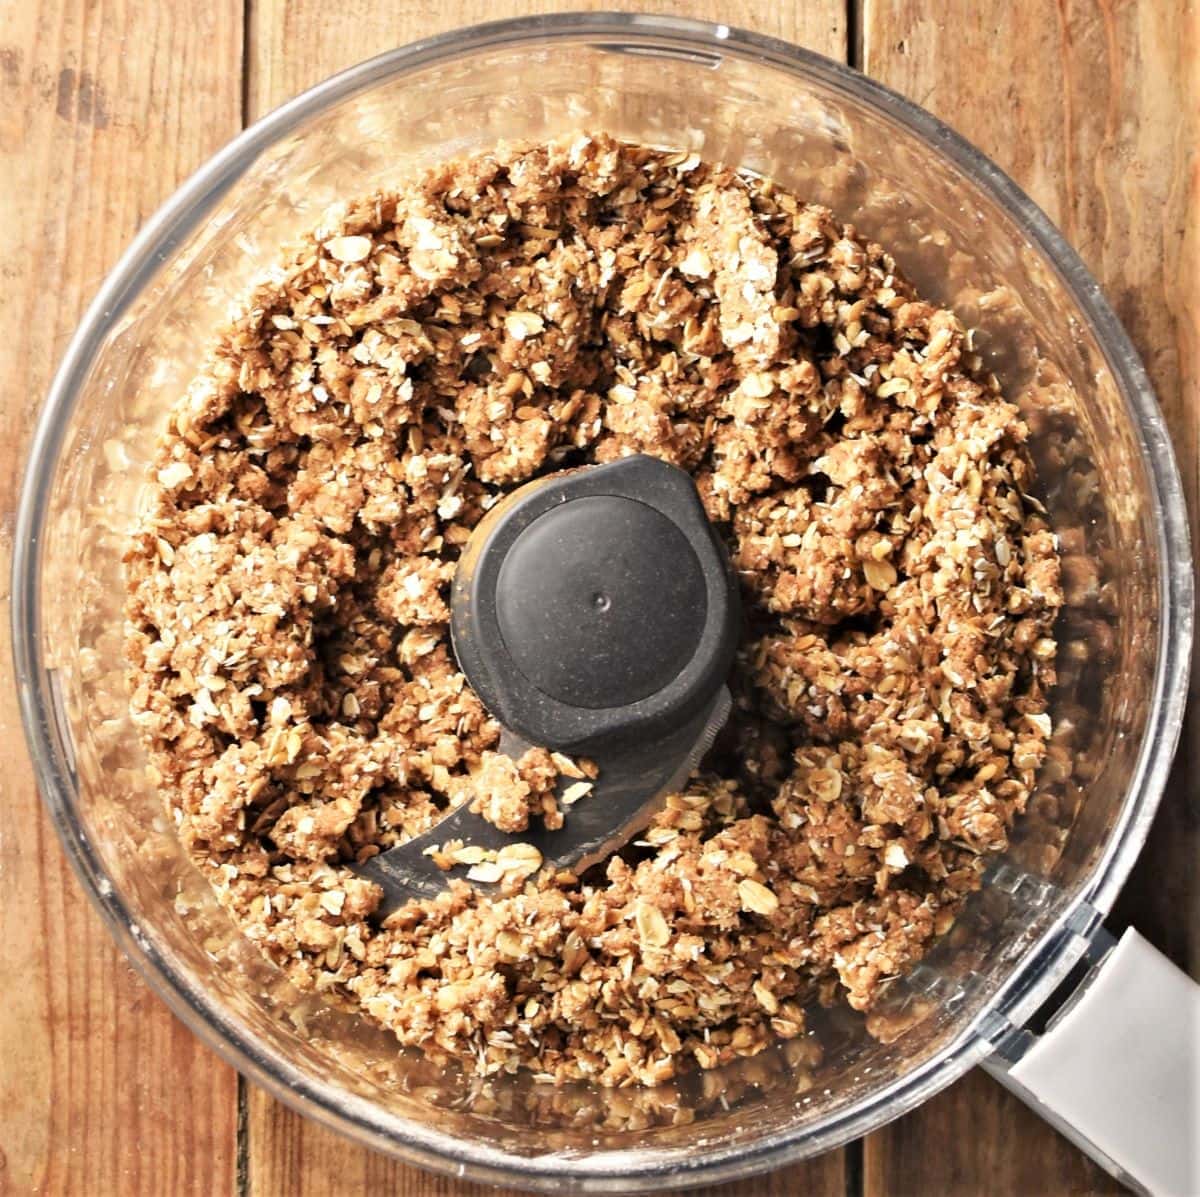 Crumble topping mixture in food processor bowl.